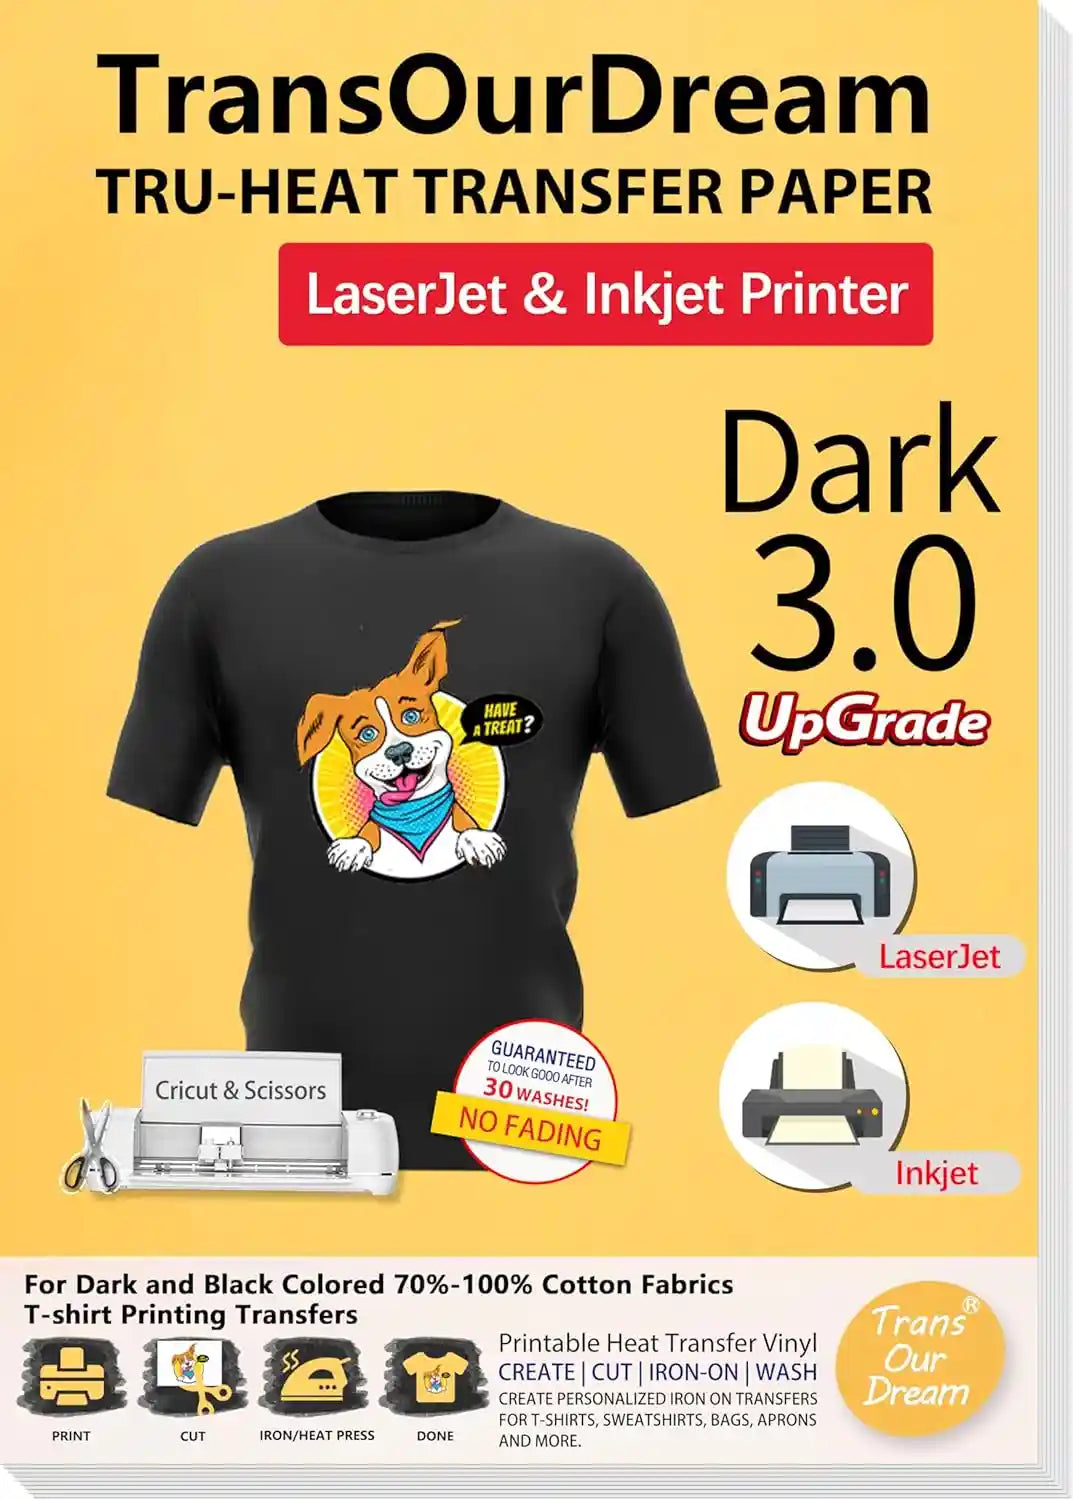 How to iron transfer paper on shirt